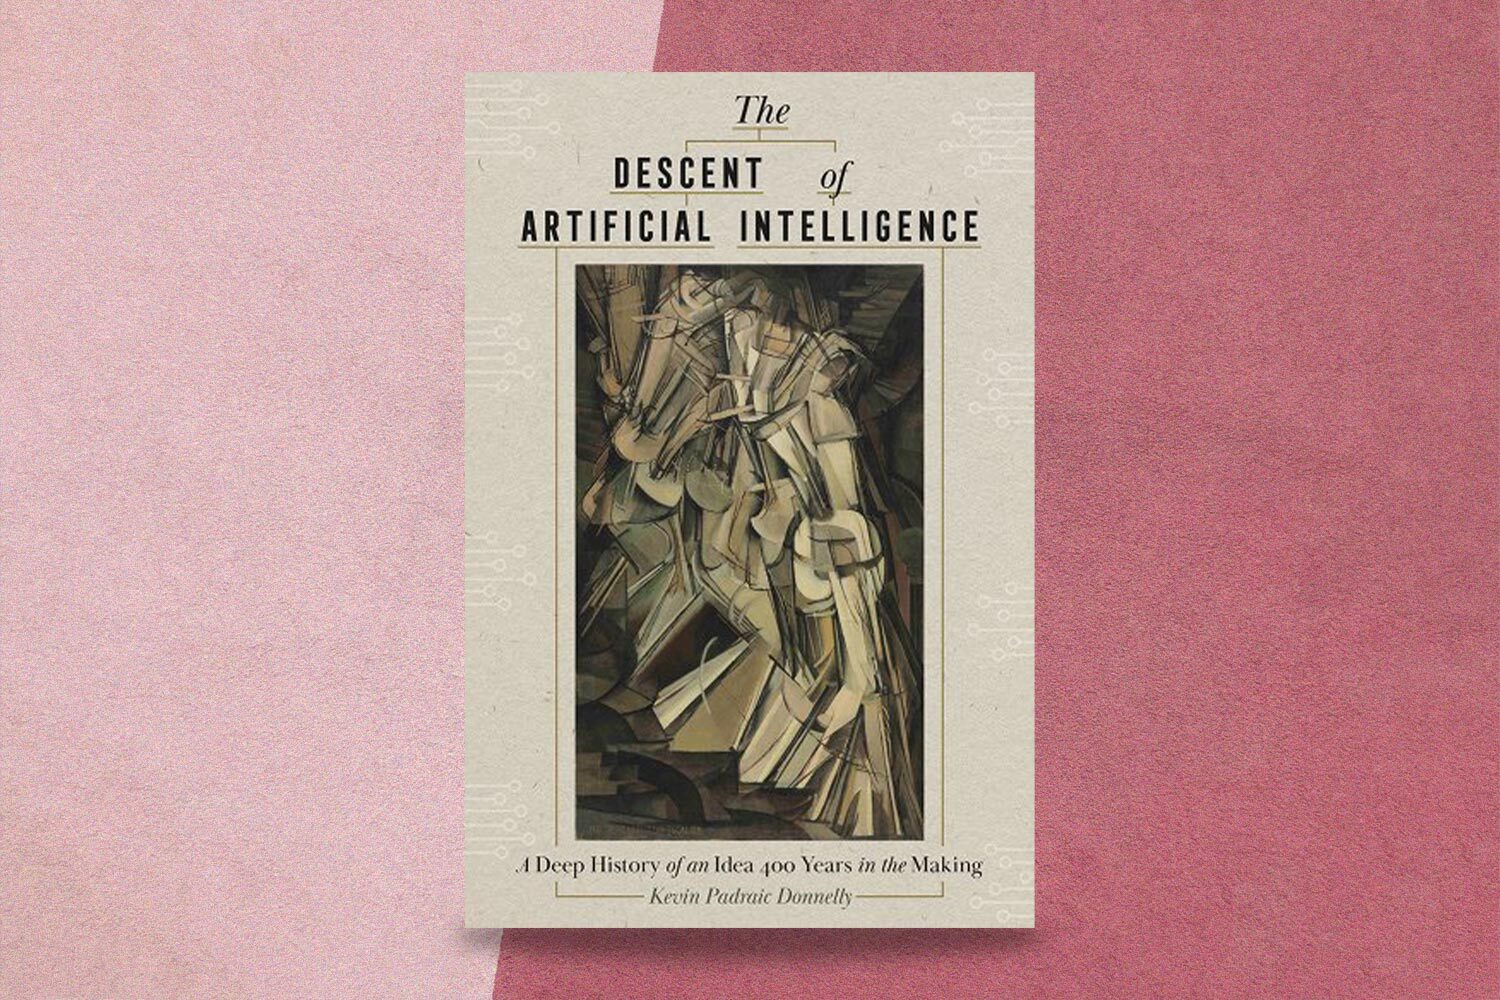 Kevin Padraic Donnelly, The Descent of Artificial Intelligence: A Deep History of an Idea 400 Years in the Making